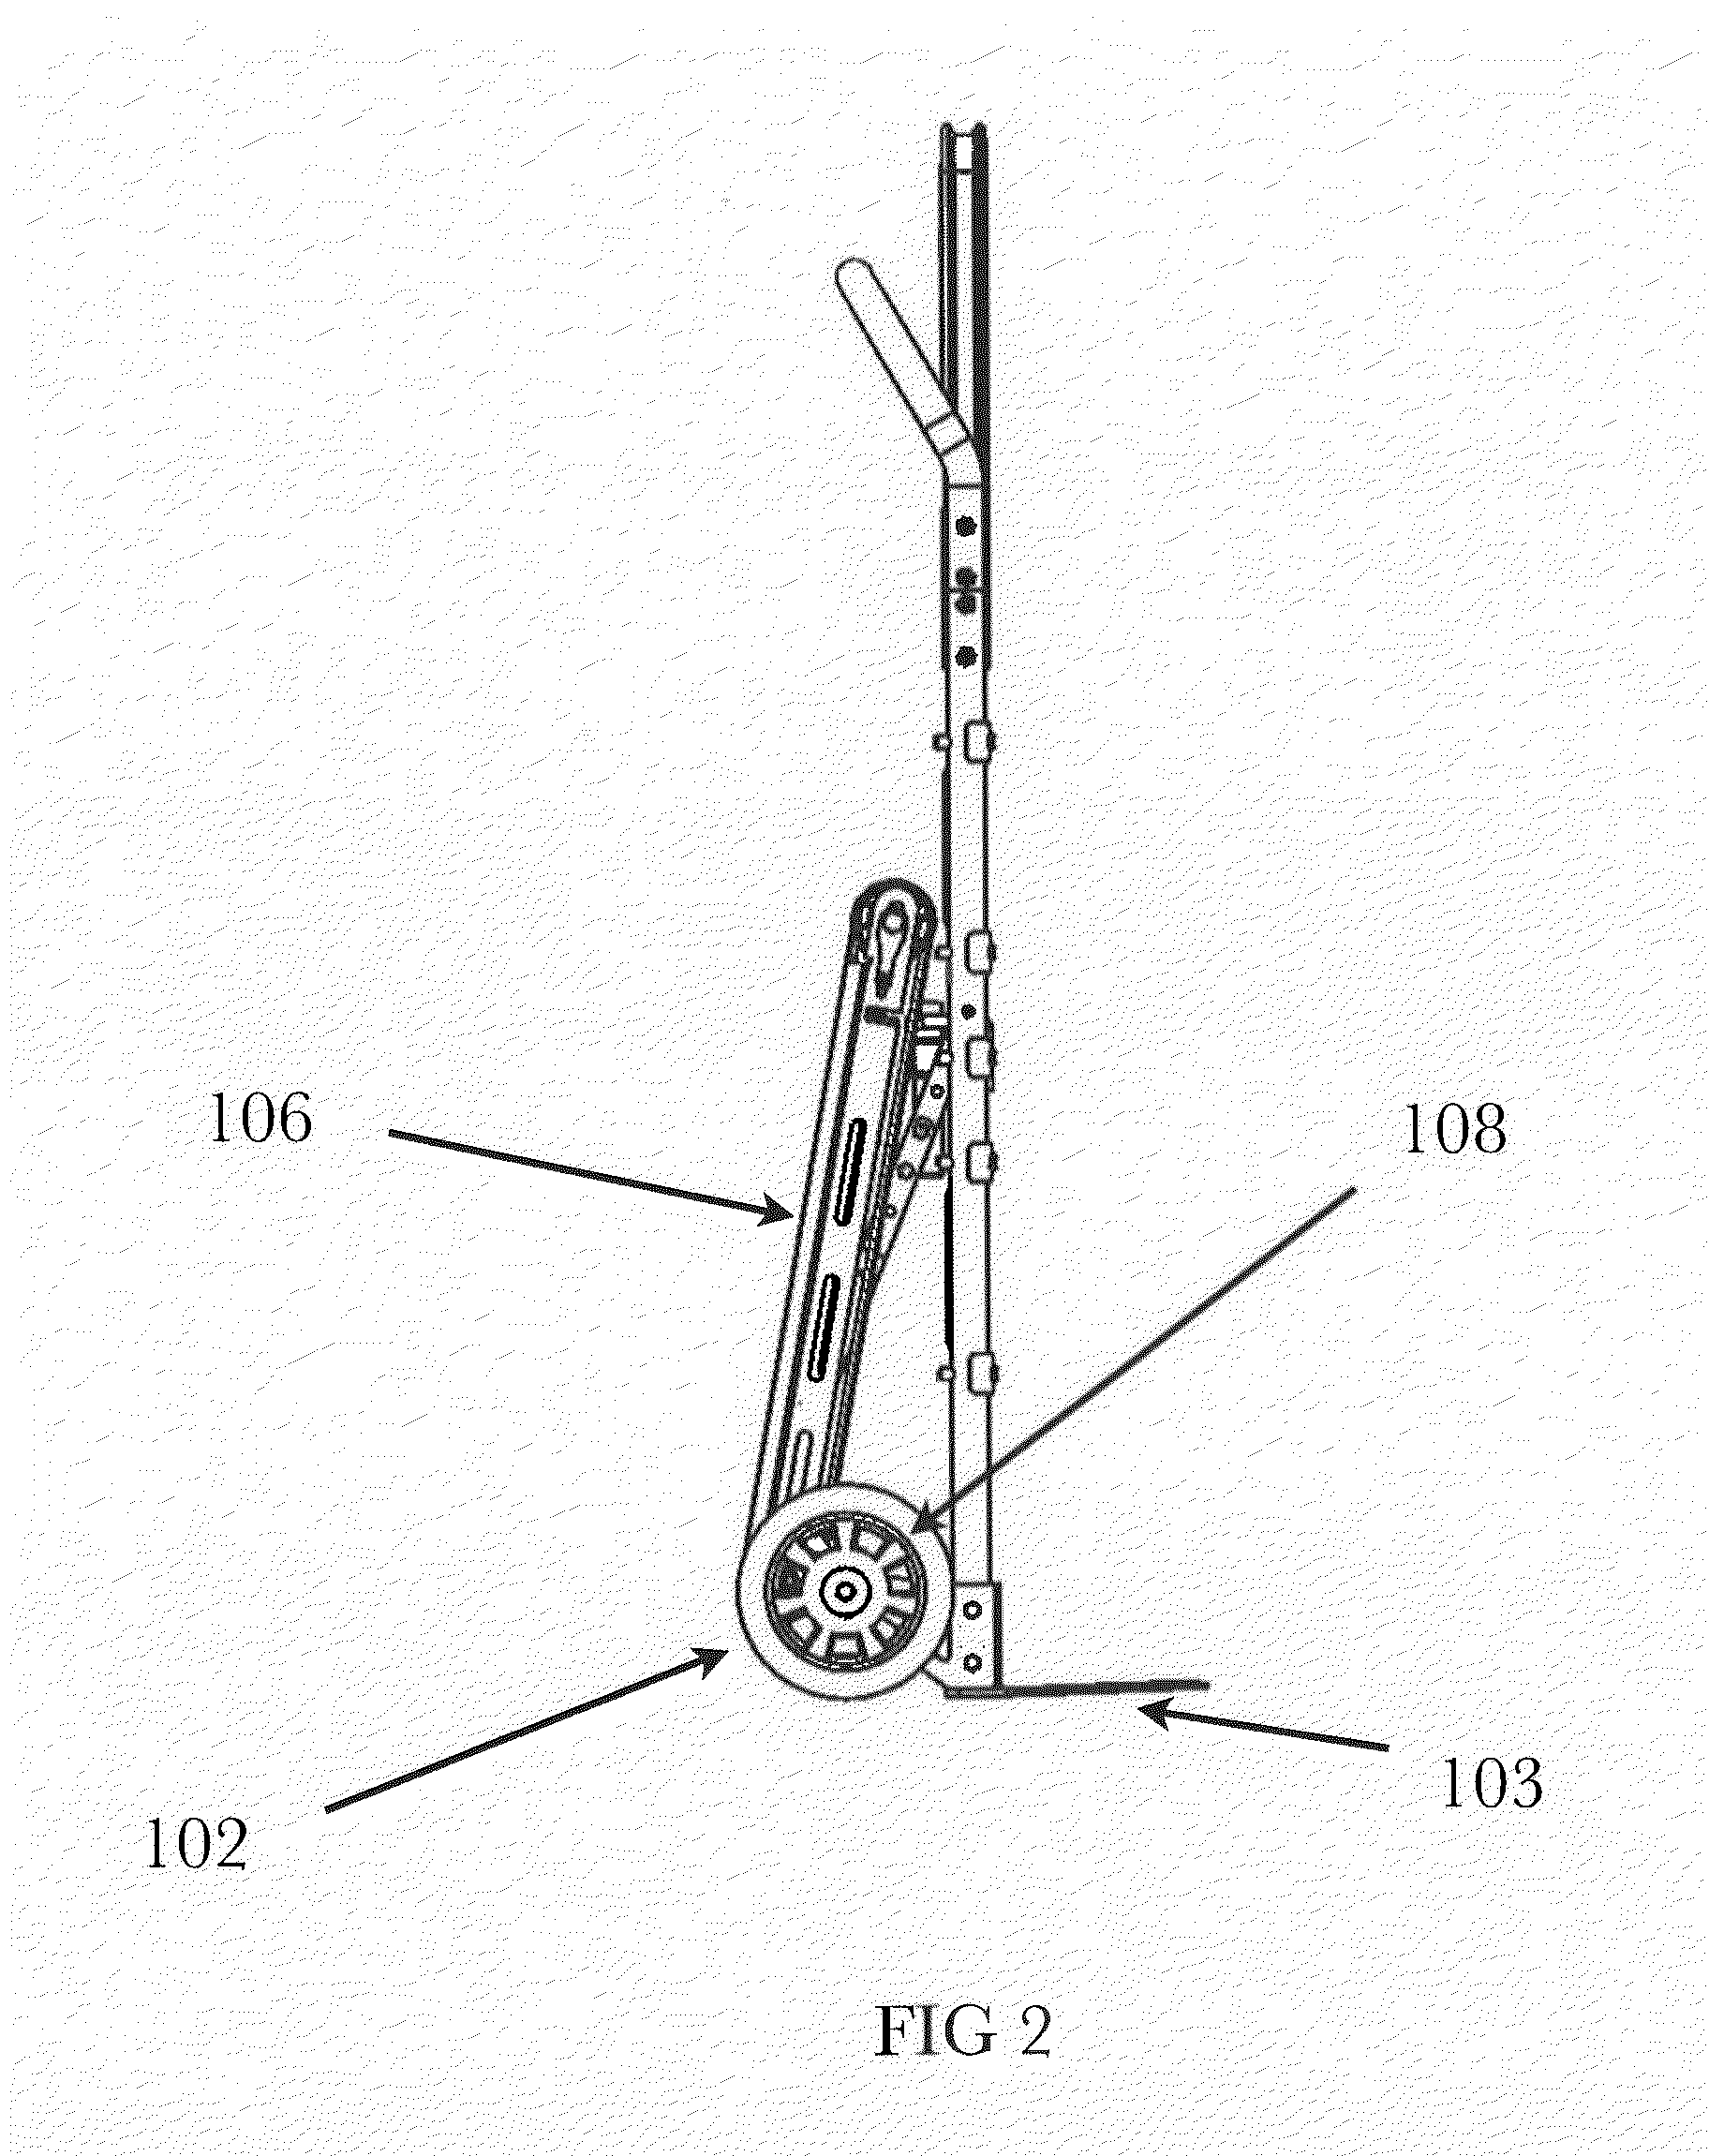 Stair traversing delivery apparatus